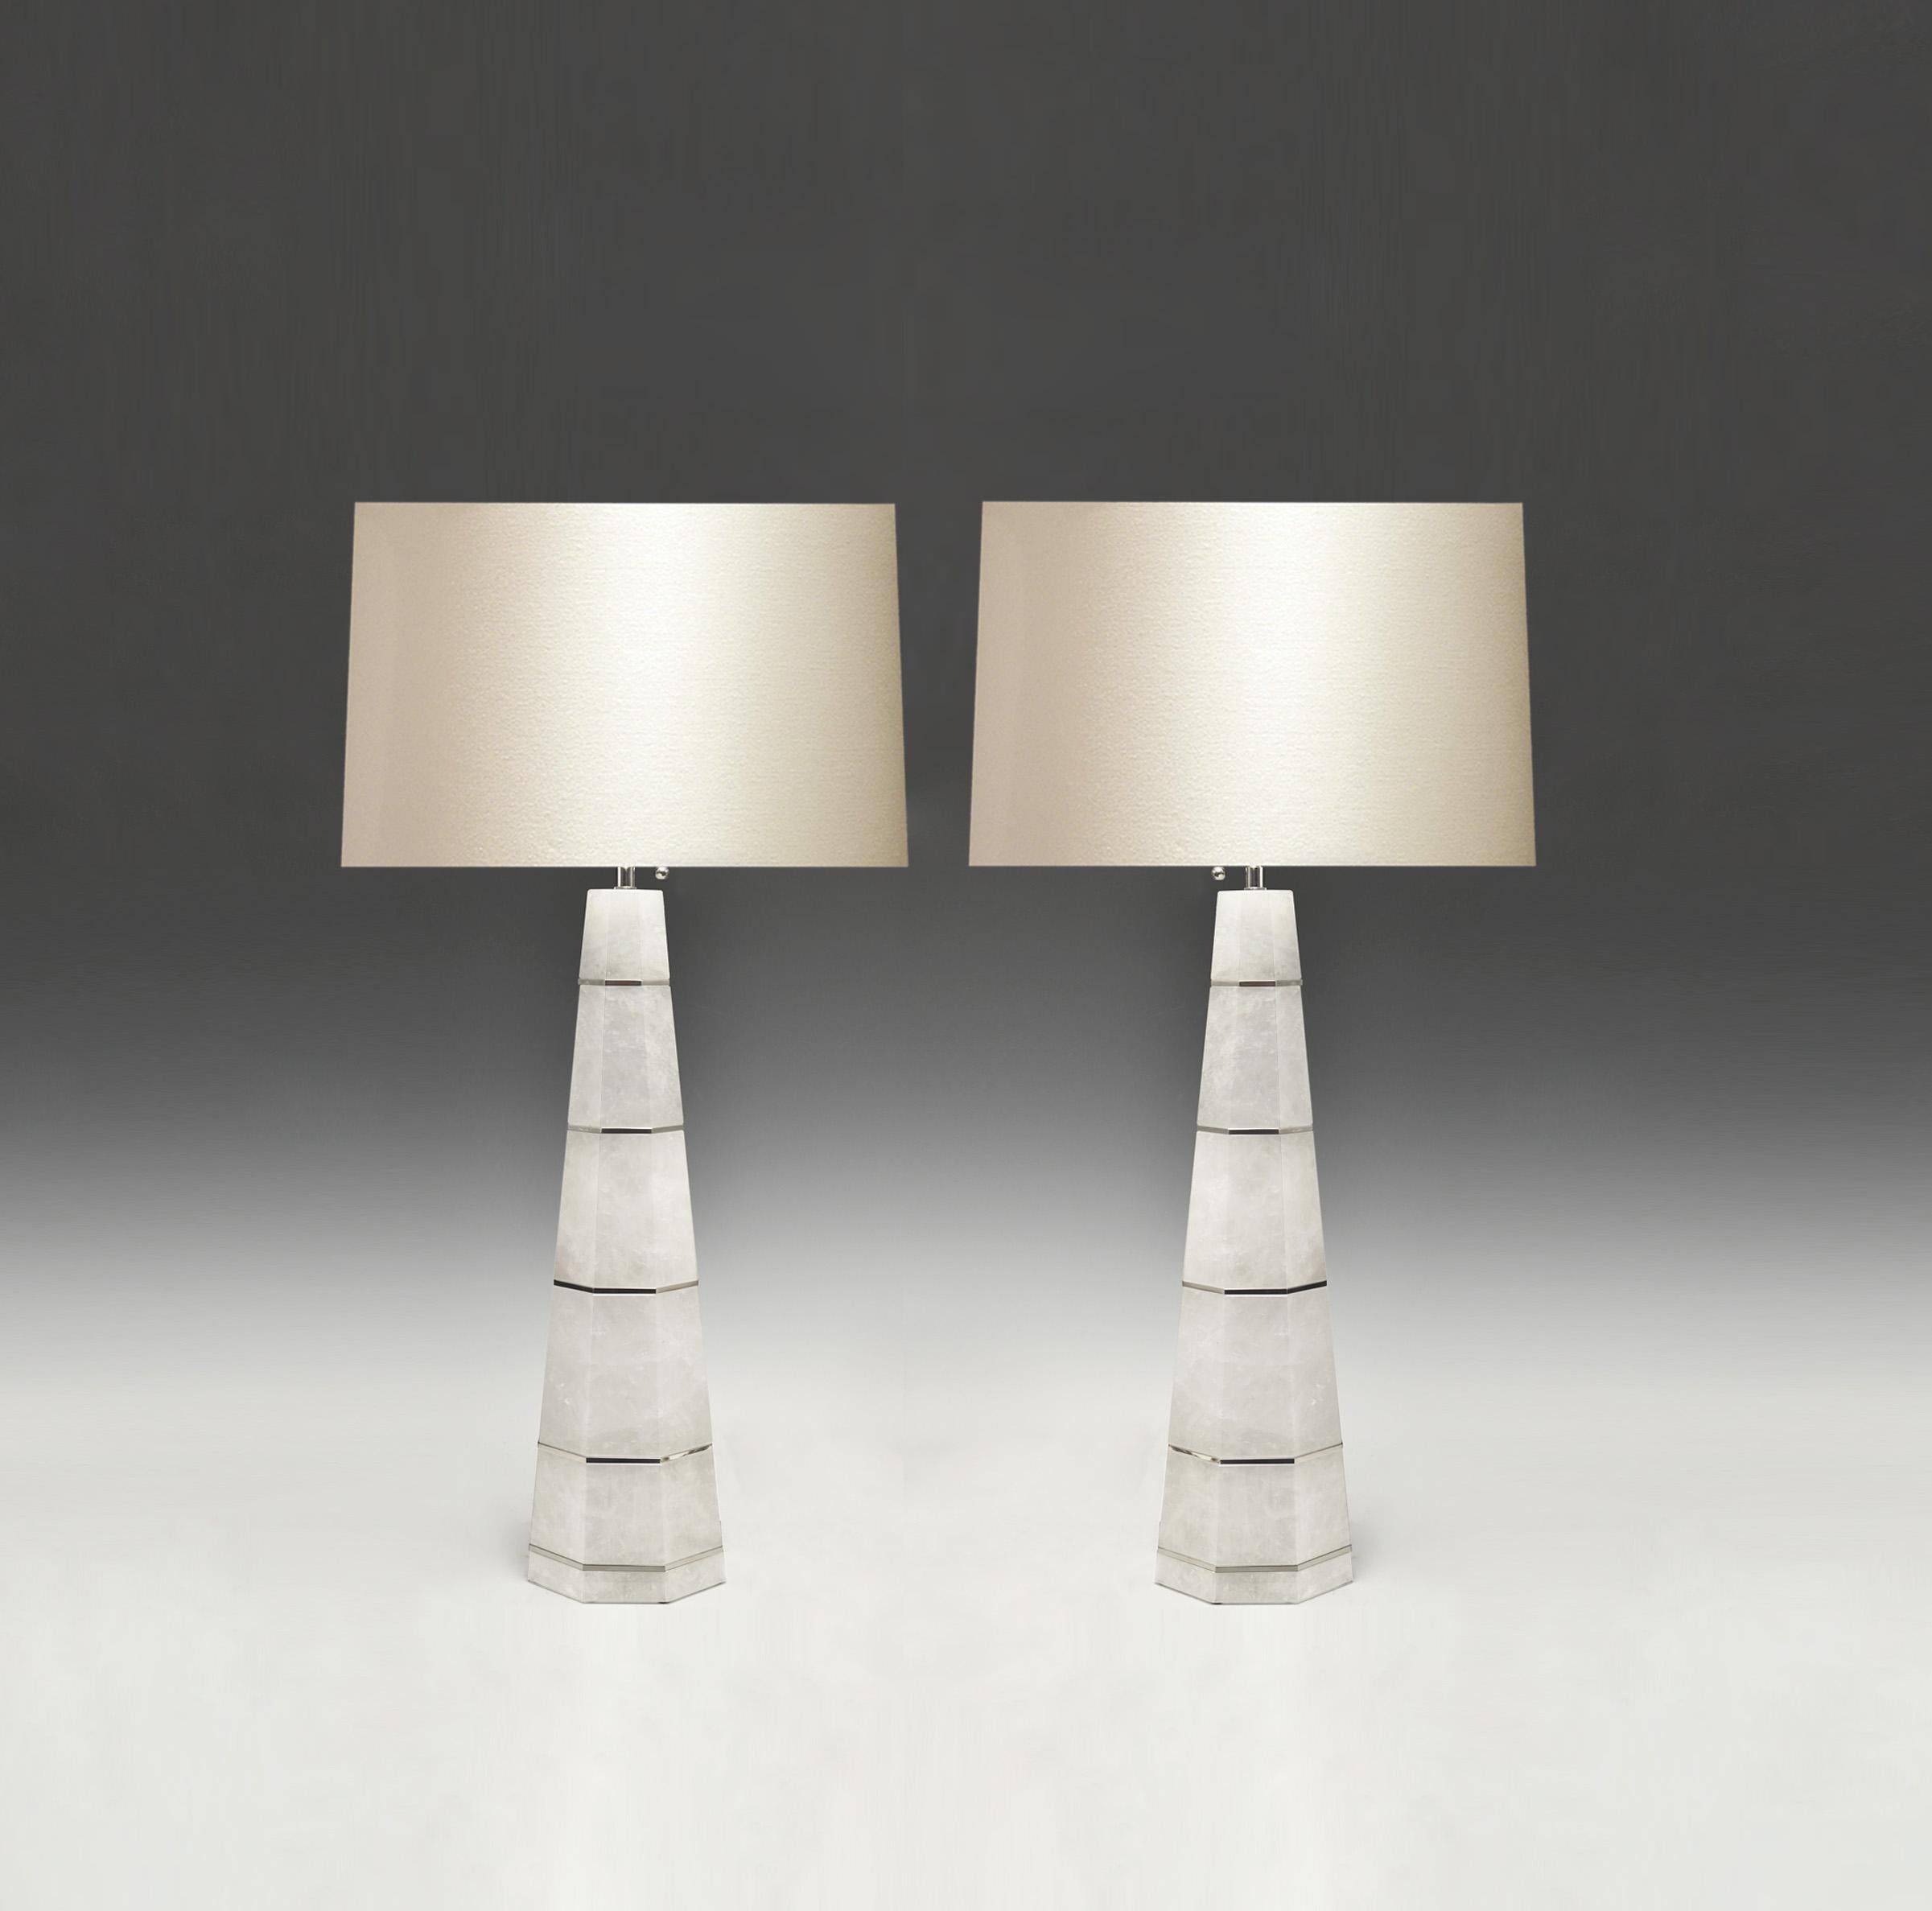 Pair of column rock crystal quartz lamps with nickel plating decoration. Created by Phoenix Gallery, NYC.
Measure: To the top of rock crystal: 21.5